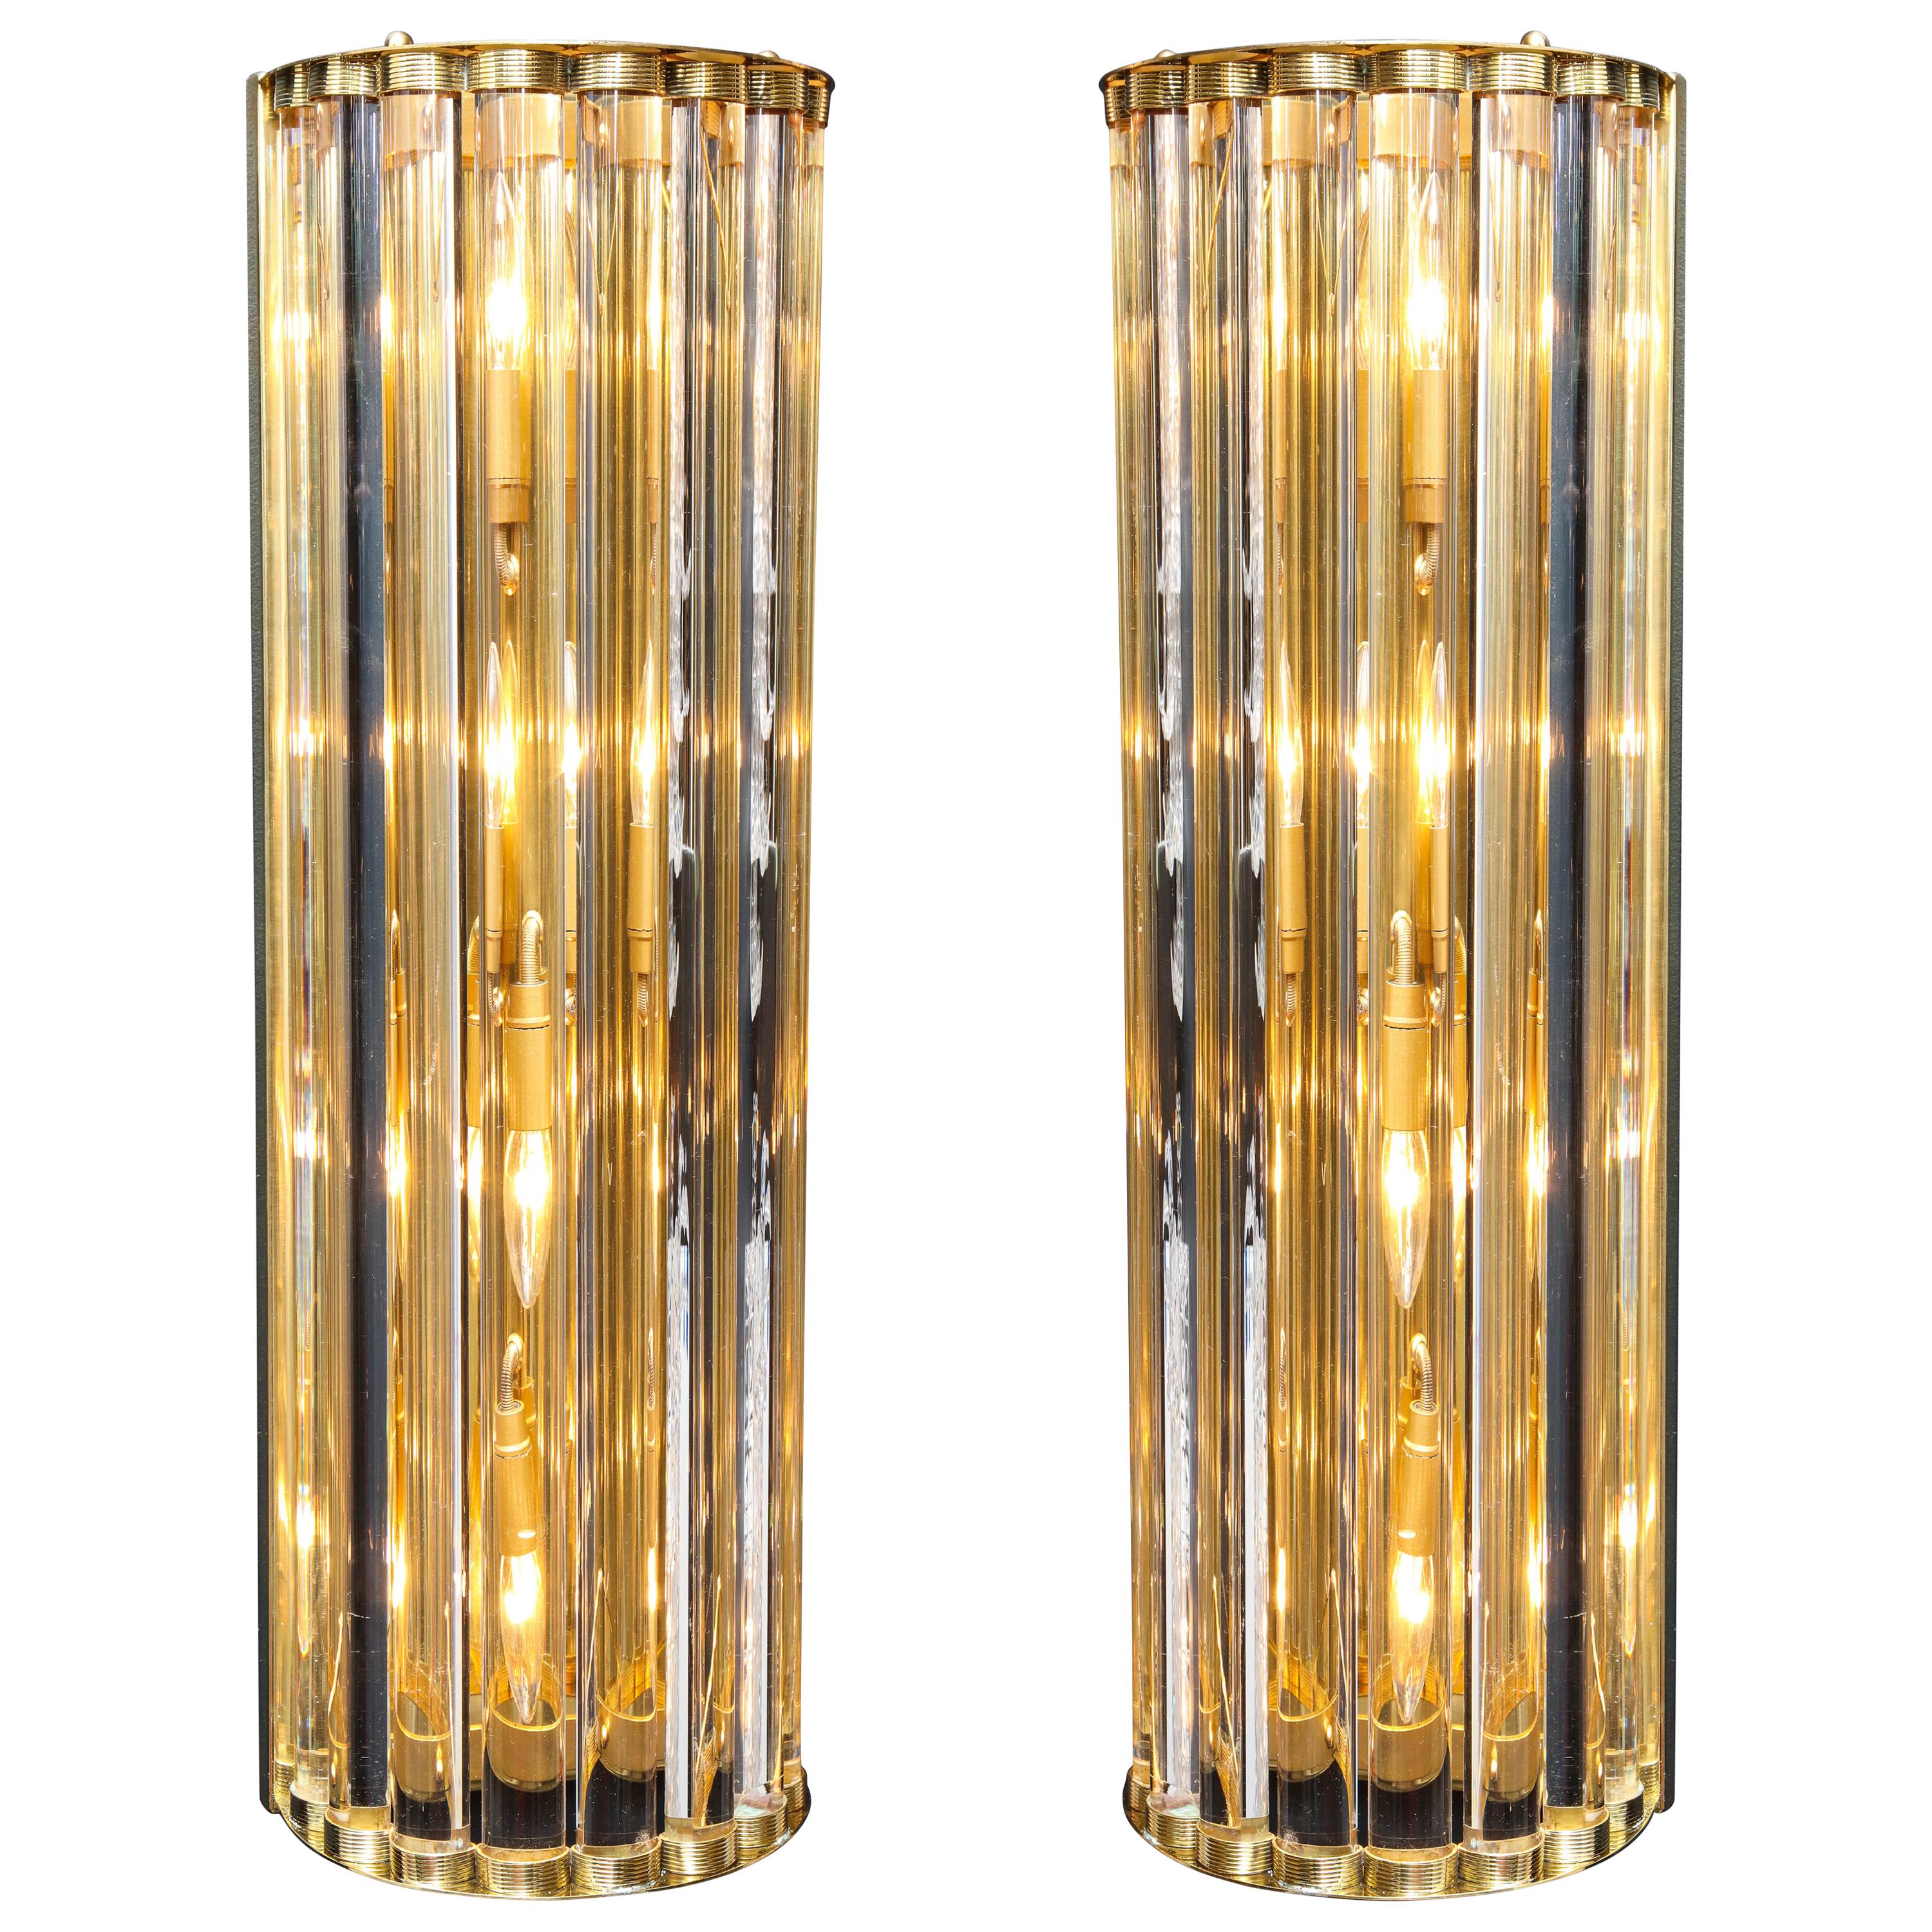 Large Pair of Murano Glass Rods and Brass Wall Sconces, Italy, 2018, 2 ft height